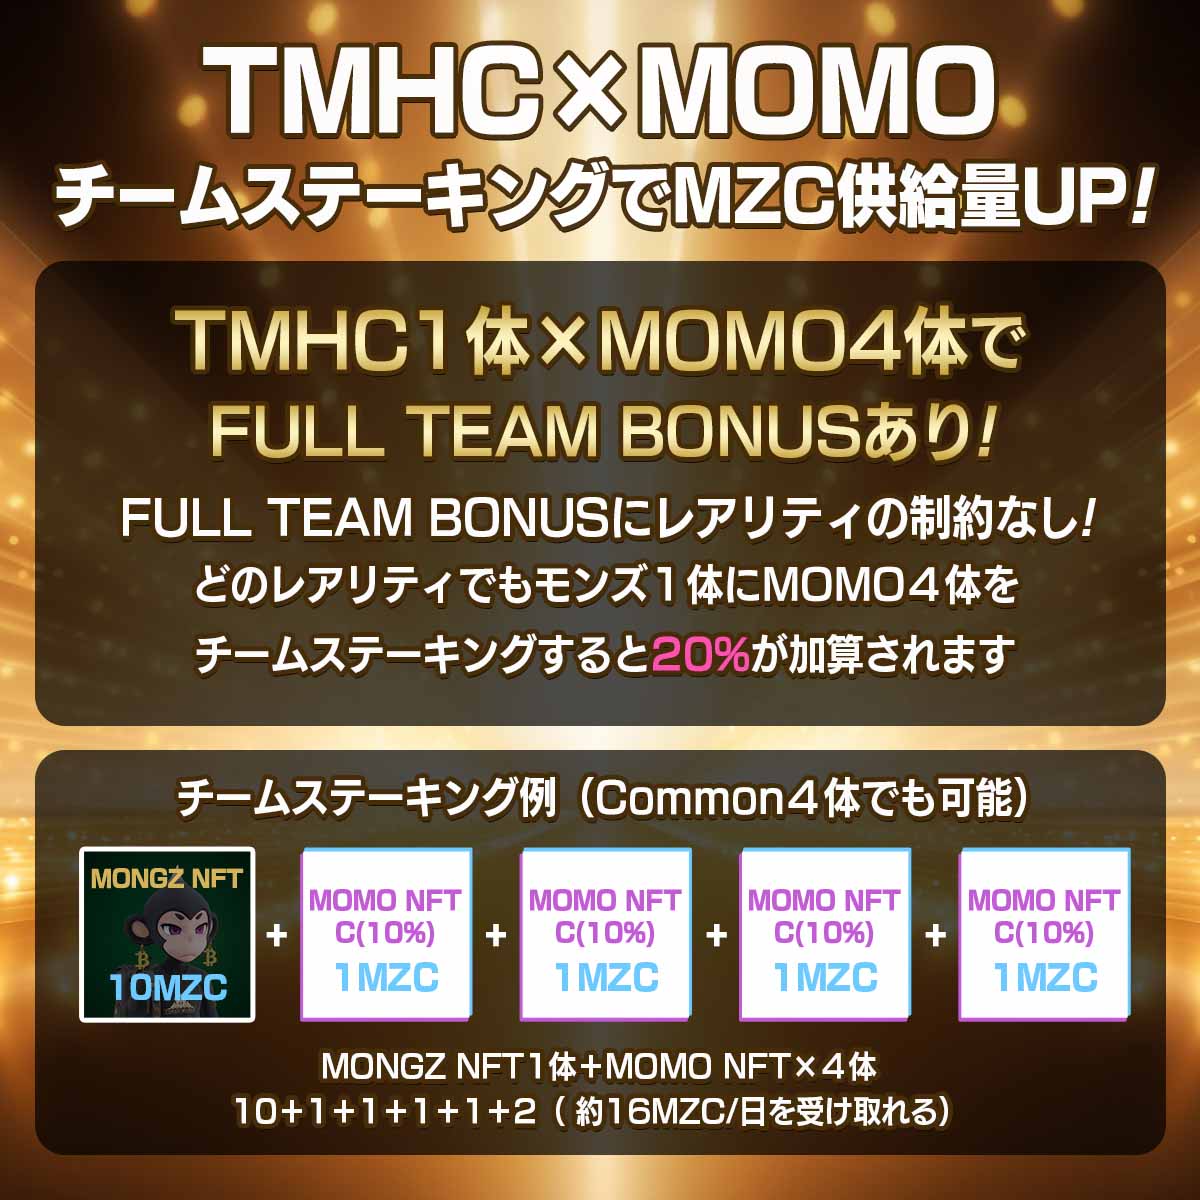 TMHC_Official tweet picture